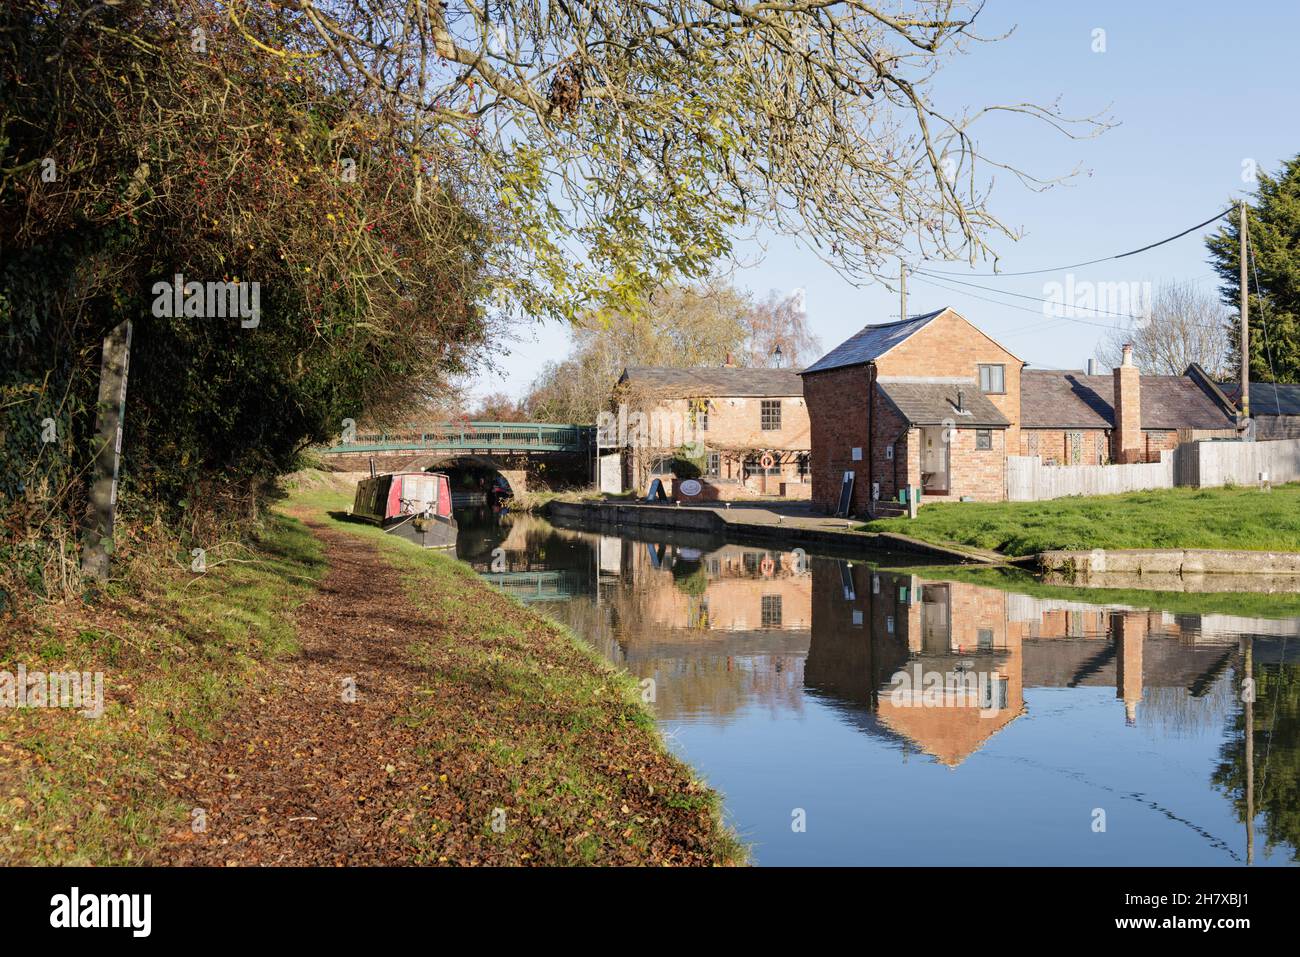 Crick, Northamptonshire, UK, November 26th 2021: In autumn the historic buildings at Crick Wharf are reflected in the water of the Grand Union Canal. Stock Photo